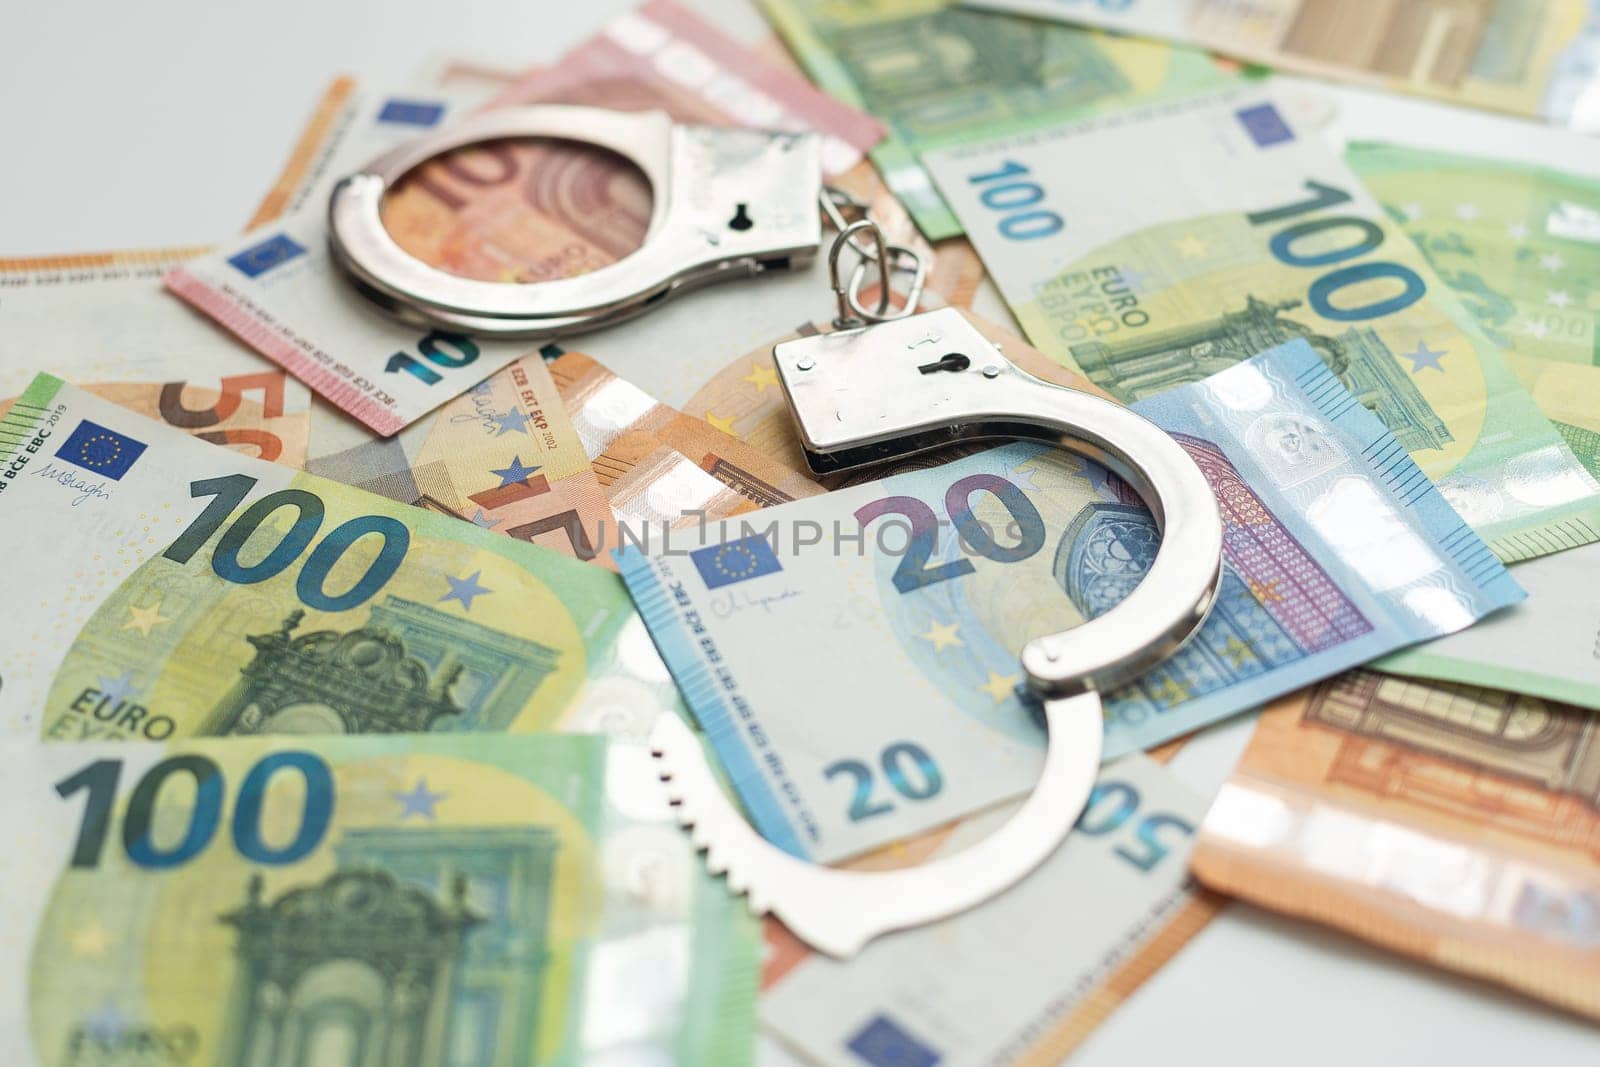 Pair of metal police handcuffs on Euros banknotes money cash background. Corruption, dirty money, gambling or financial crime ideas concept. by Andelov13